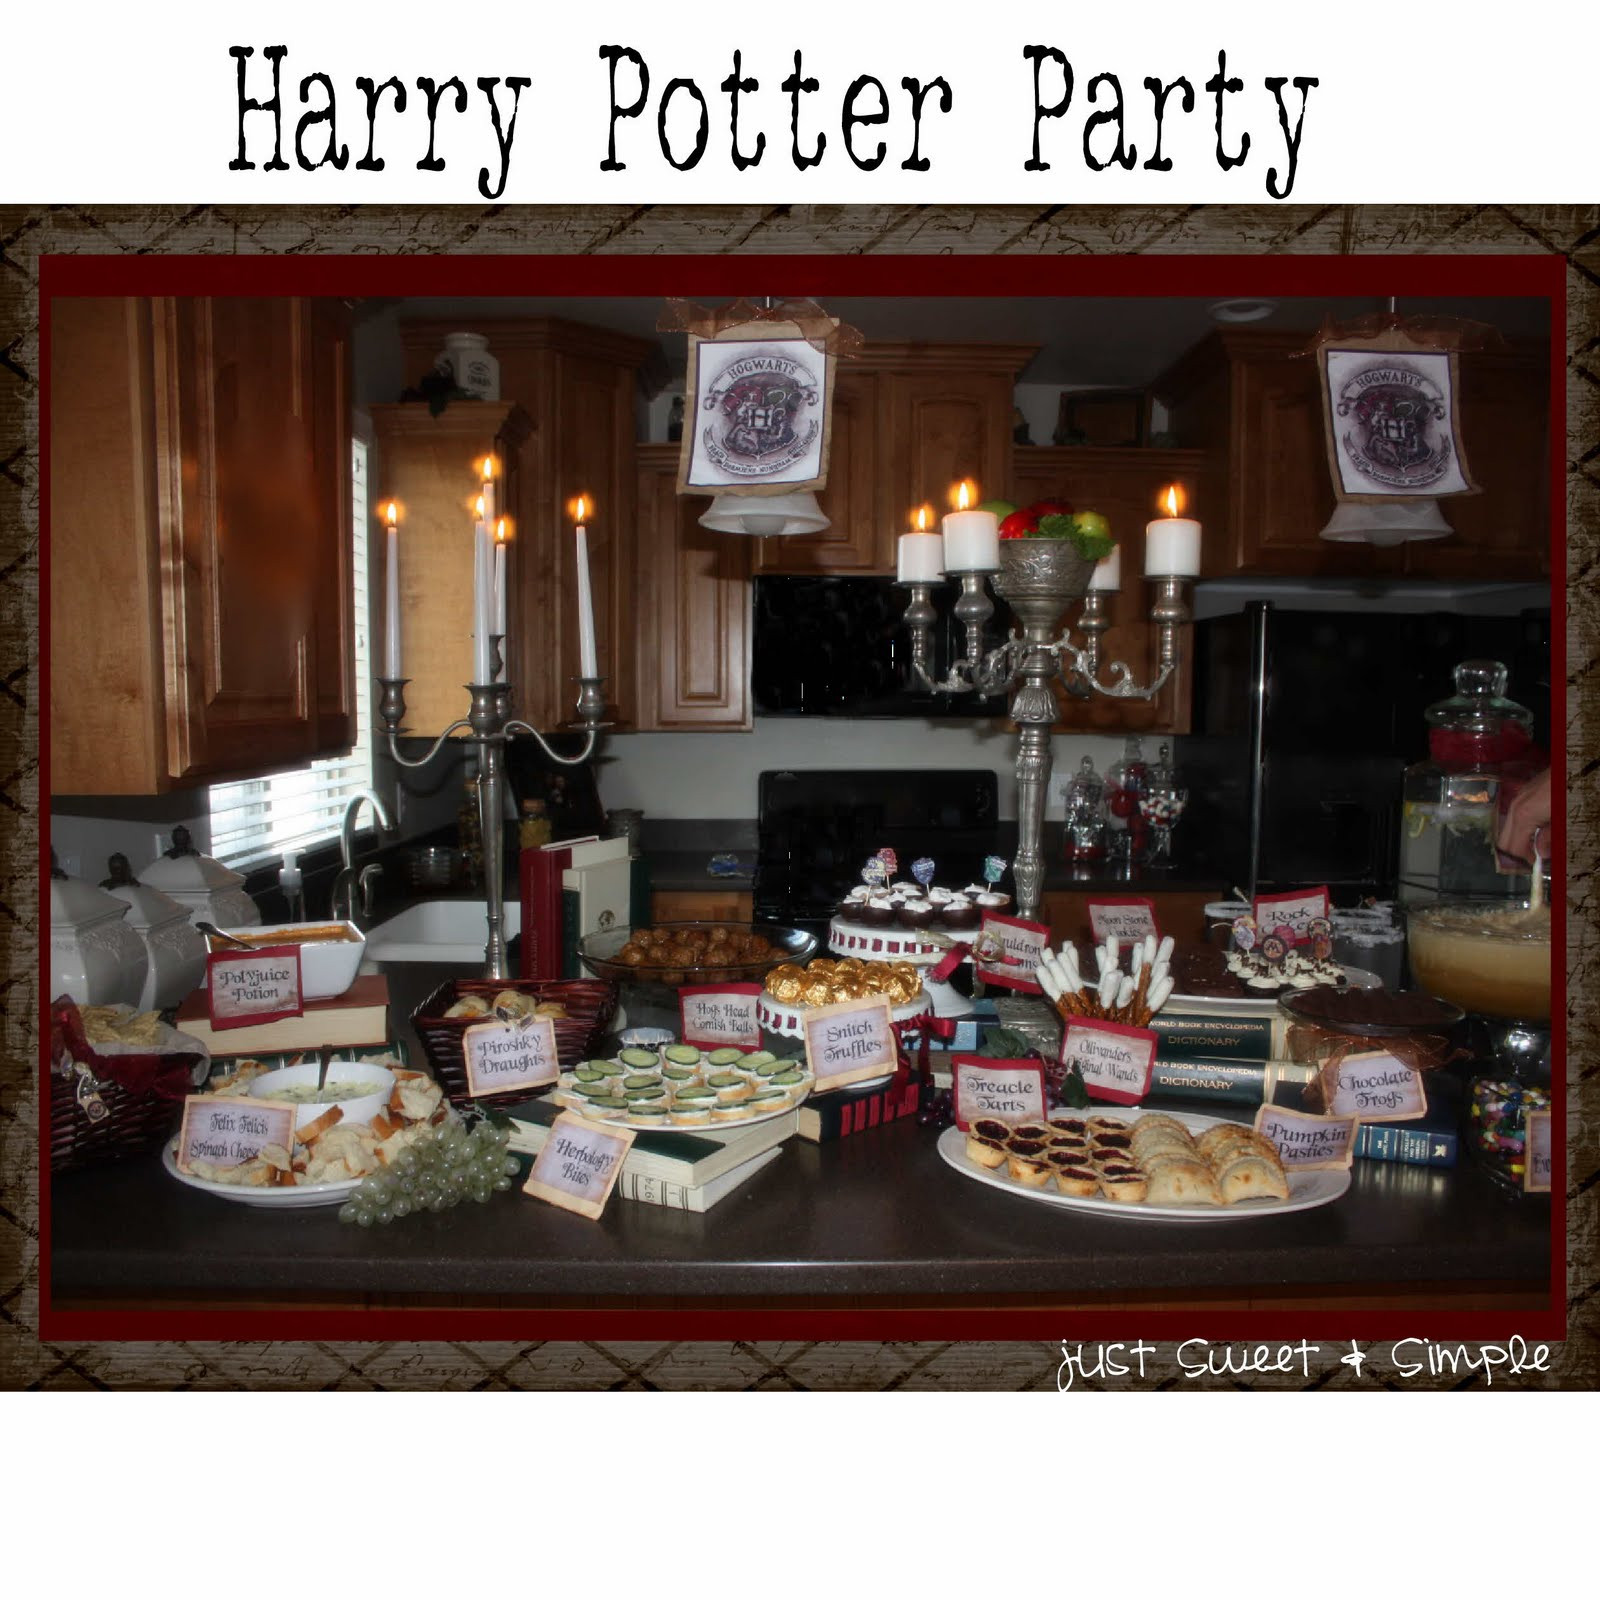 Harry Potter Birthday Party Ideas
 just Sweet and Simple Harry Potter Party